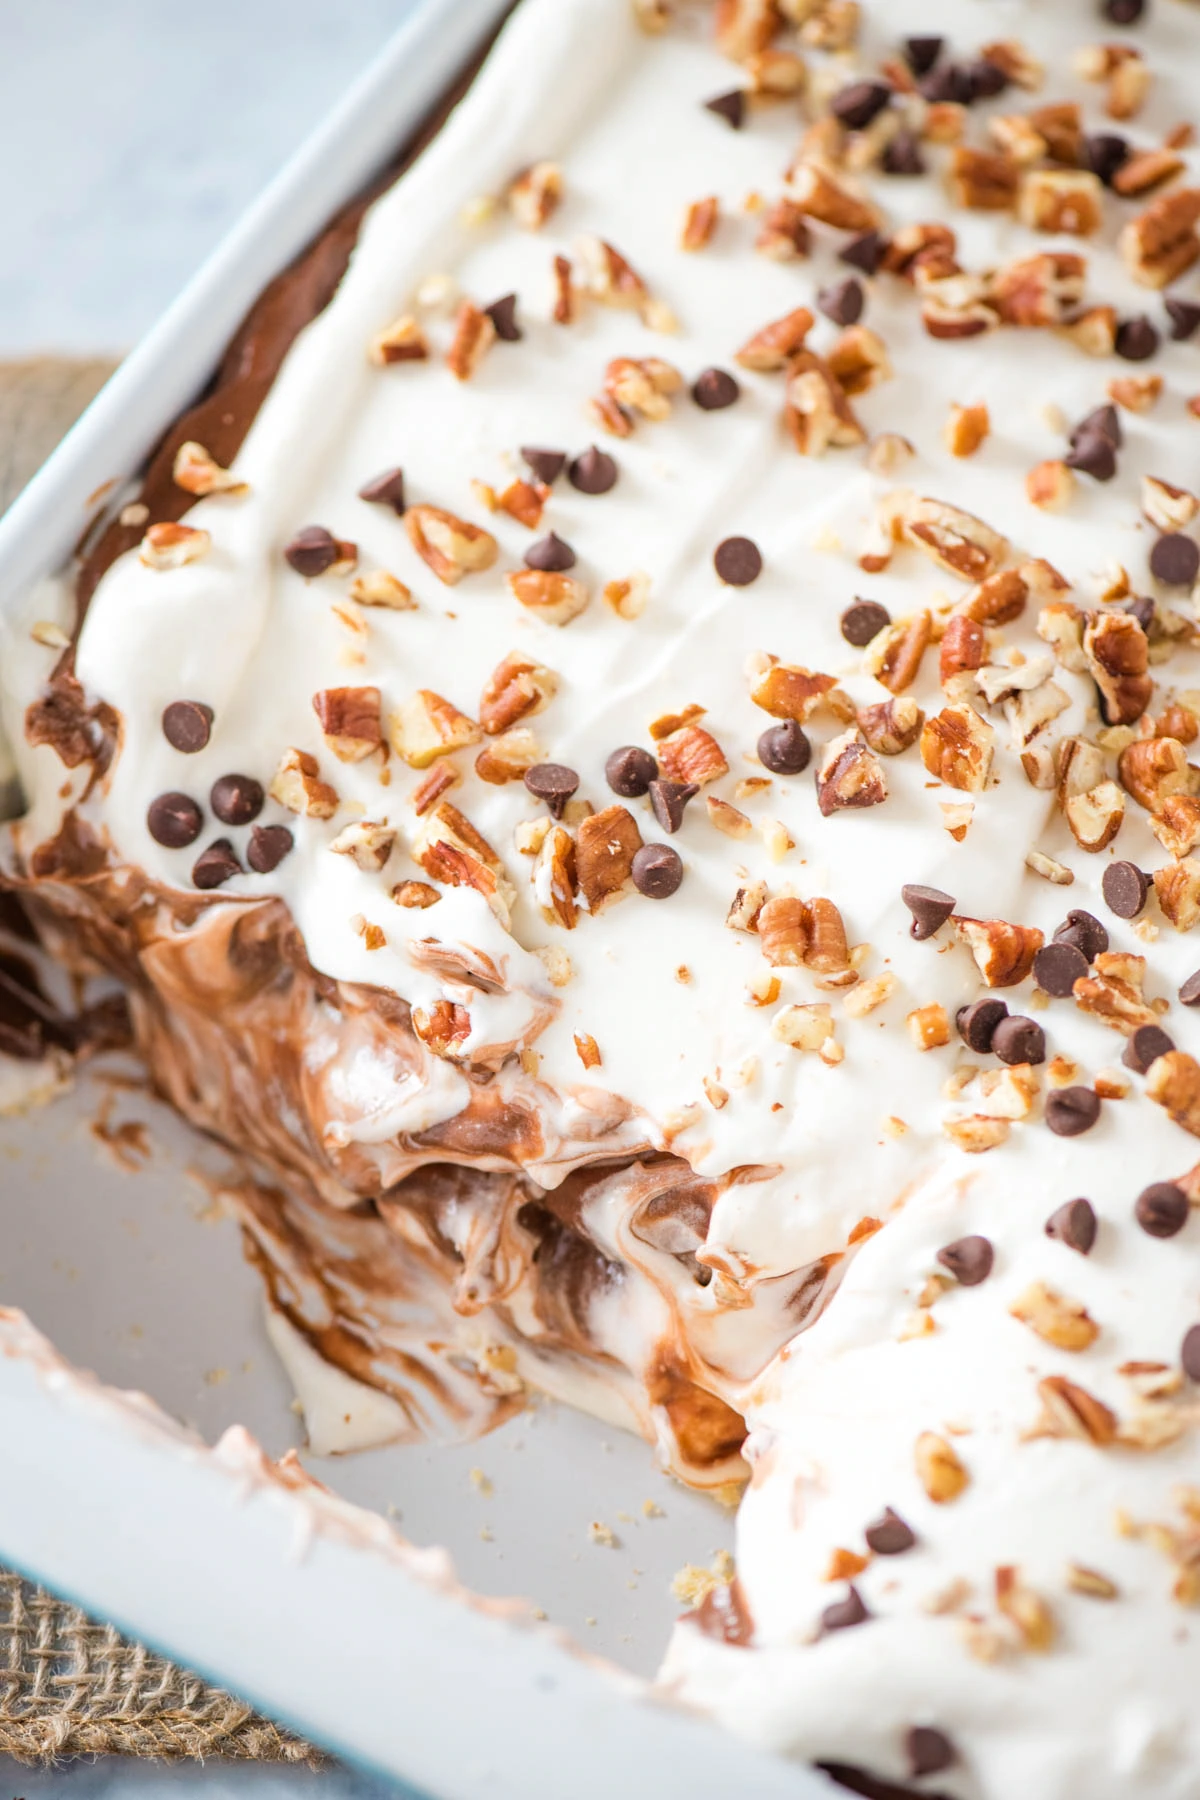 no bake chocolate delight recipe in a large blue and white baking dish with mini chocolate chips and chopped pecans on top